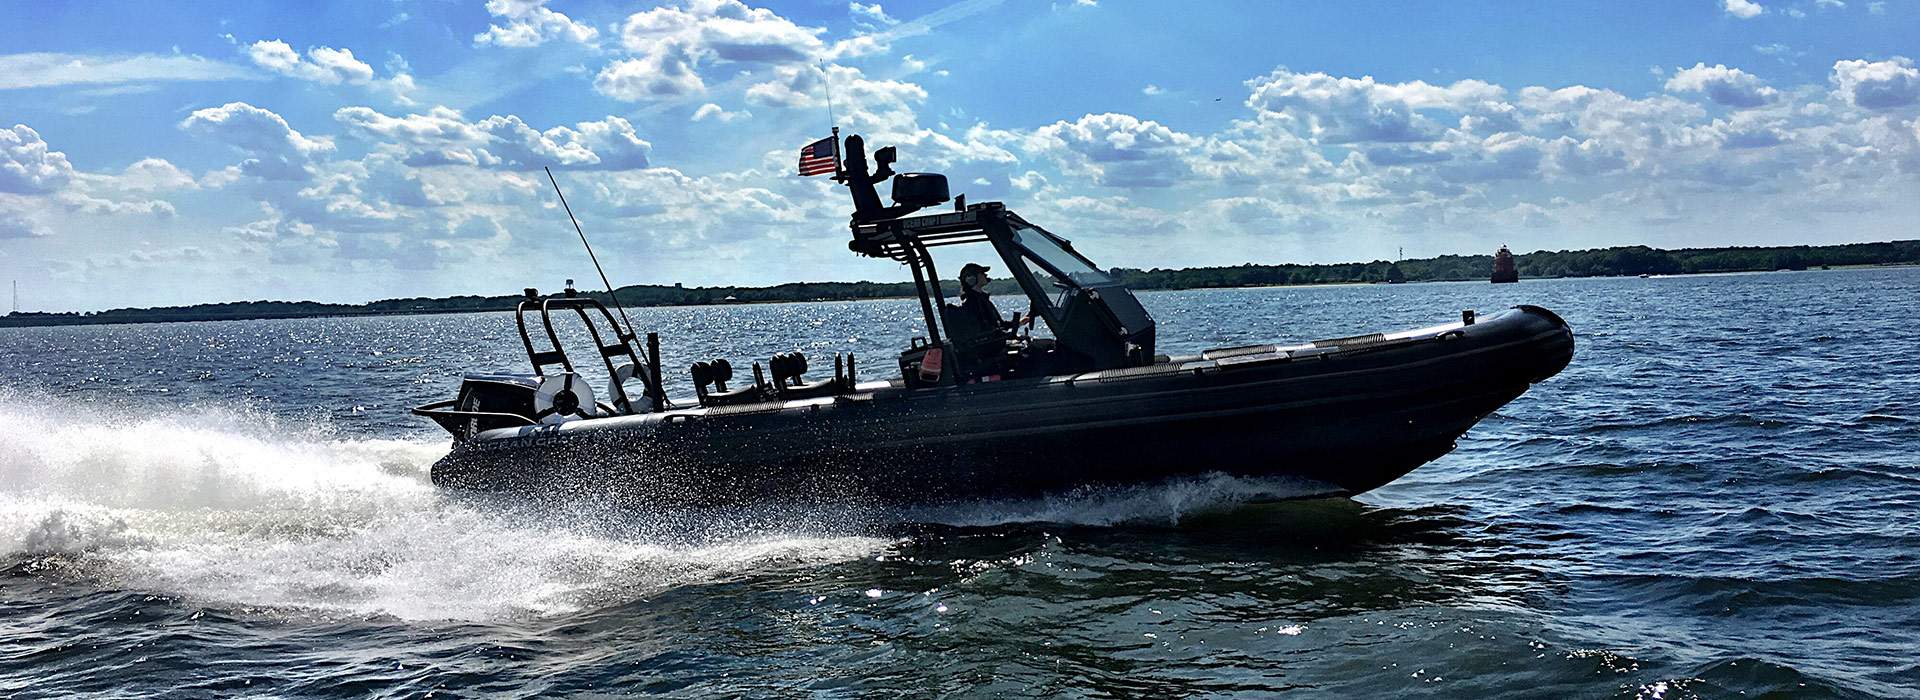 Come experience our cutting-edge 9.5m RHIB at the 2017 Bay Bridge Boat Show